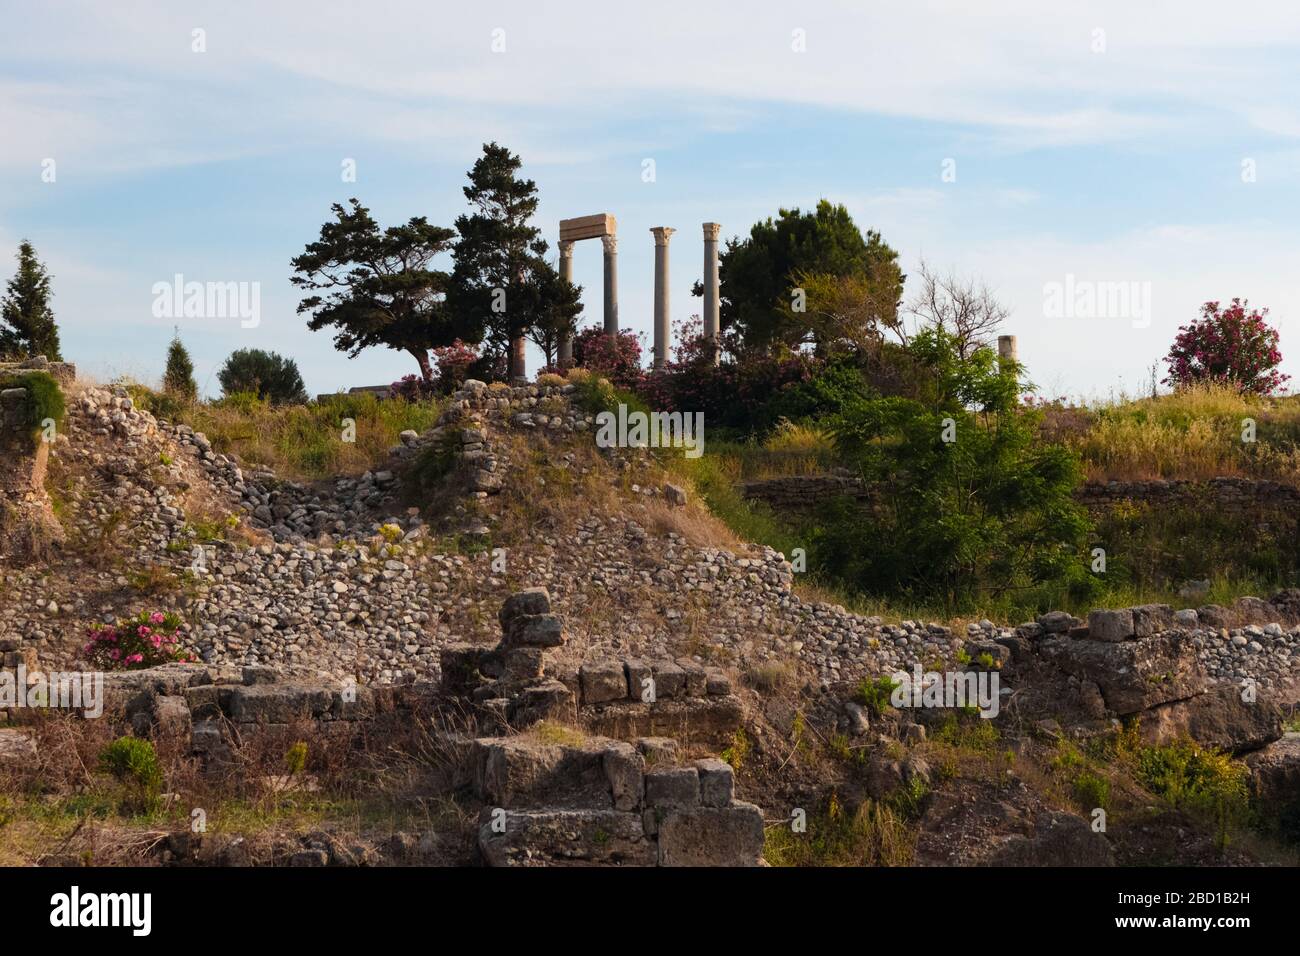 Archaeological ruins of Roman built structures at Byblos, Lebanon. Stock Photo